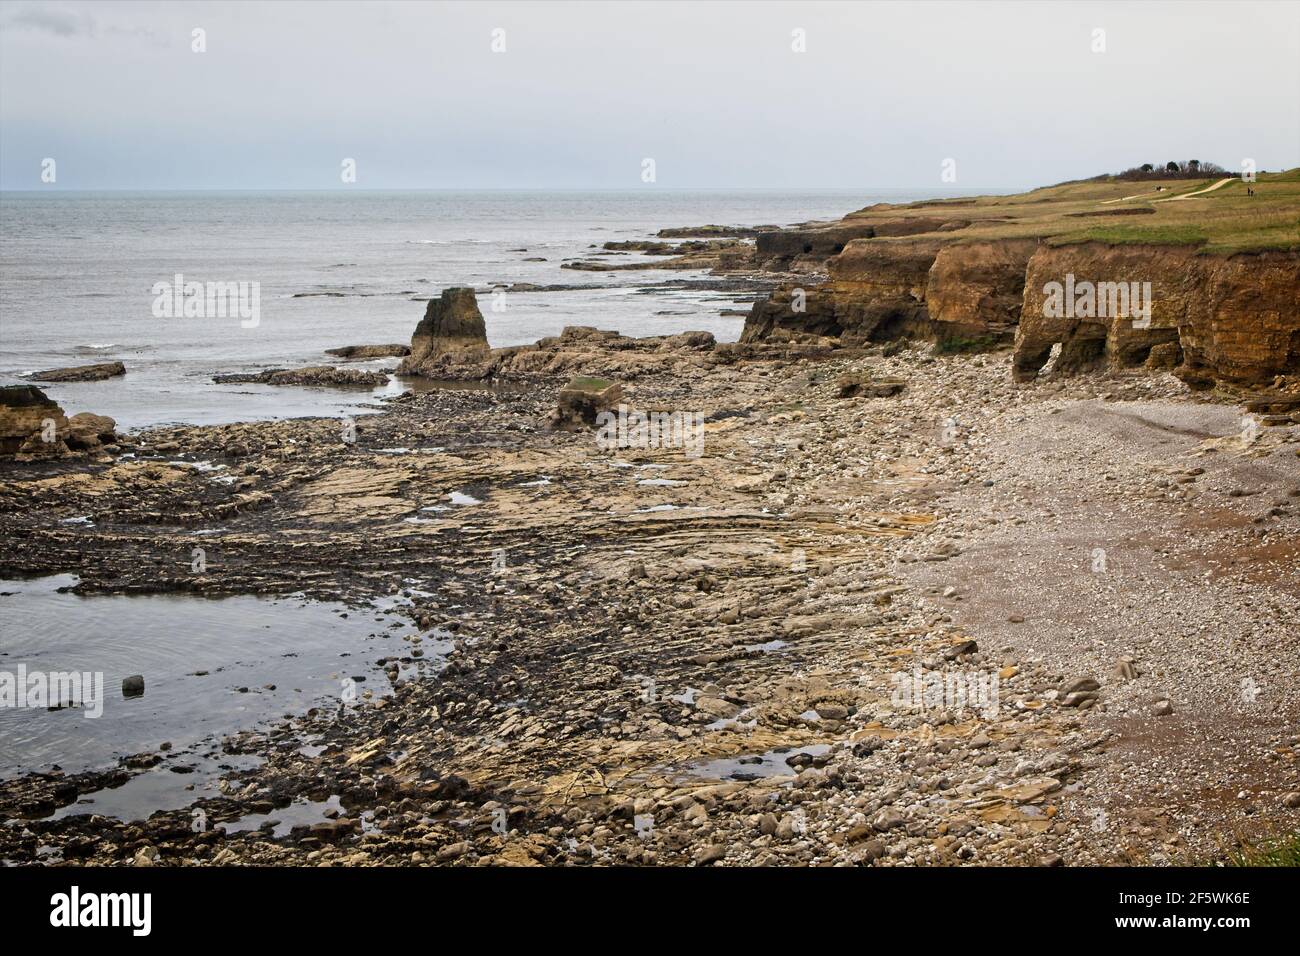 Looking south down the North Sea coast from near the Souter Lighthouse showing the pebbly, rocky beach and cliff faces. Stock Photo